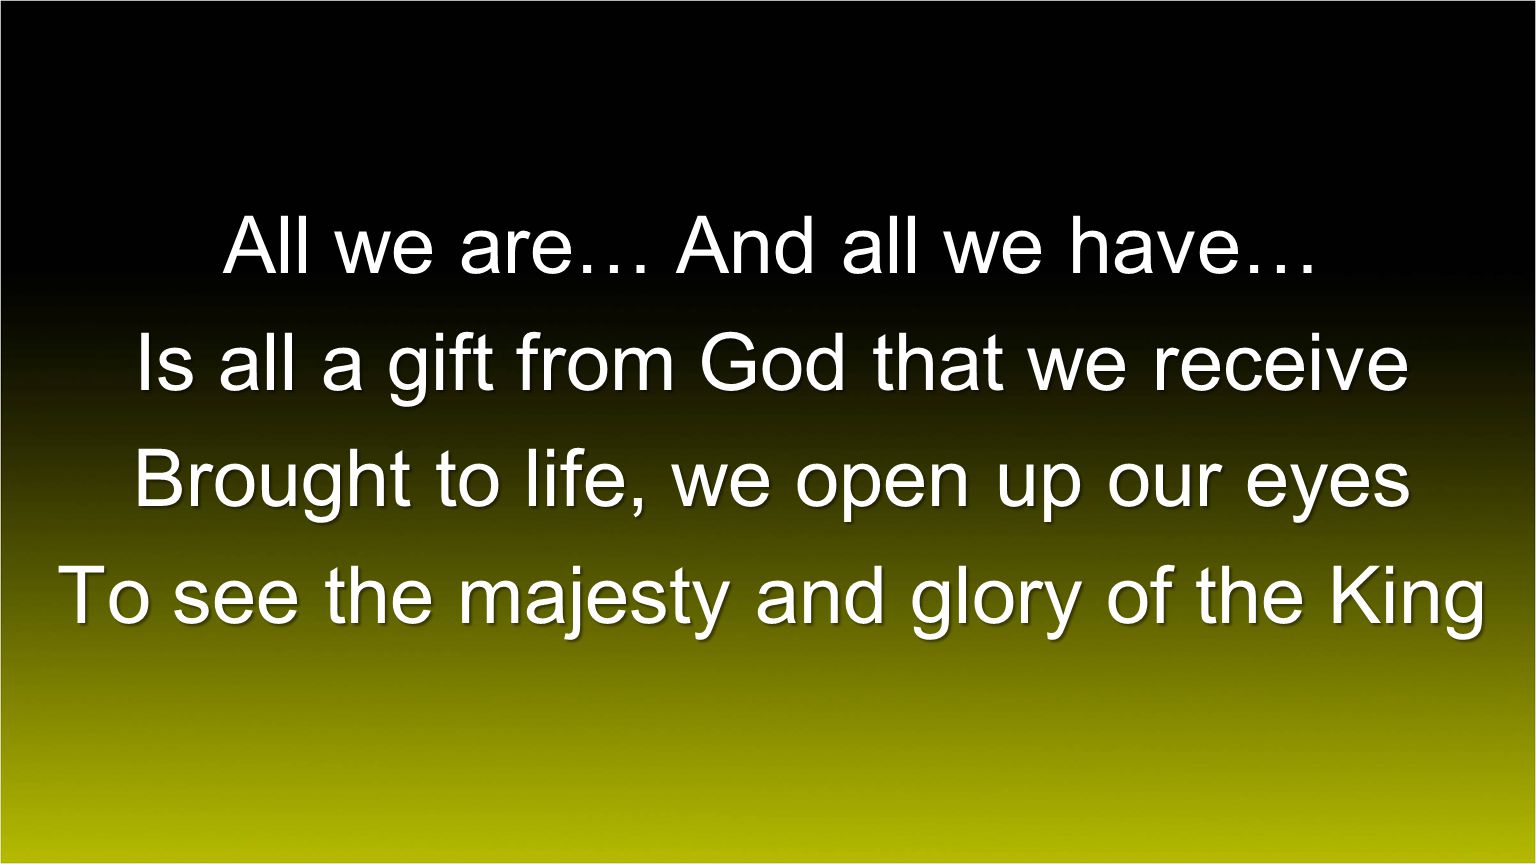 All we are… And all we have… Is all a gift from God that we receive